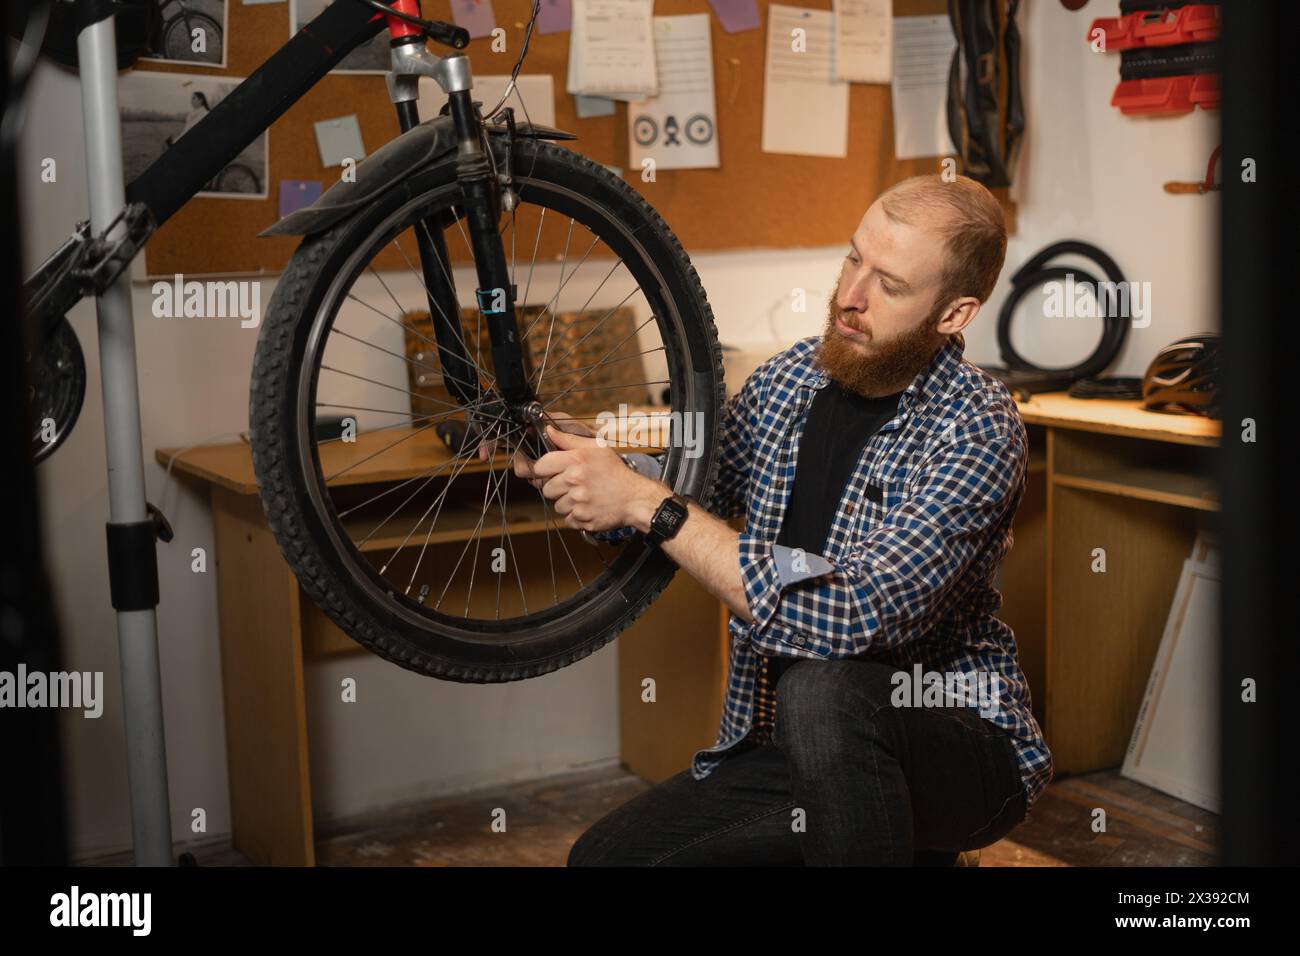 Bearded red-haired man in a checkered shirt repairs a bicycle while squatting in a garage or workshop. Stock Photo